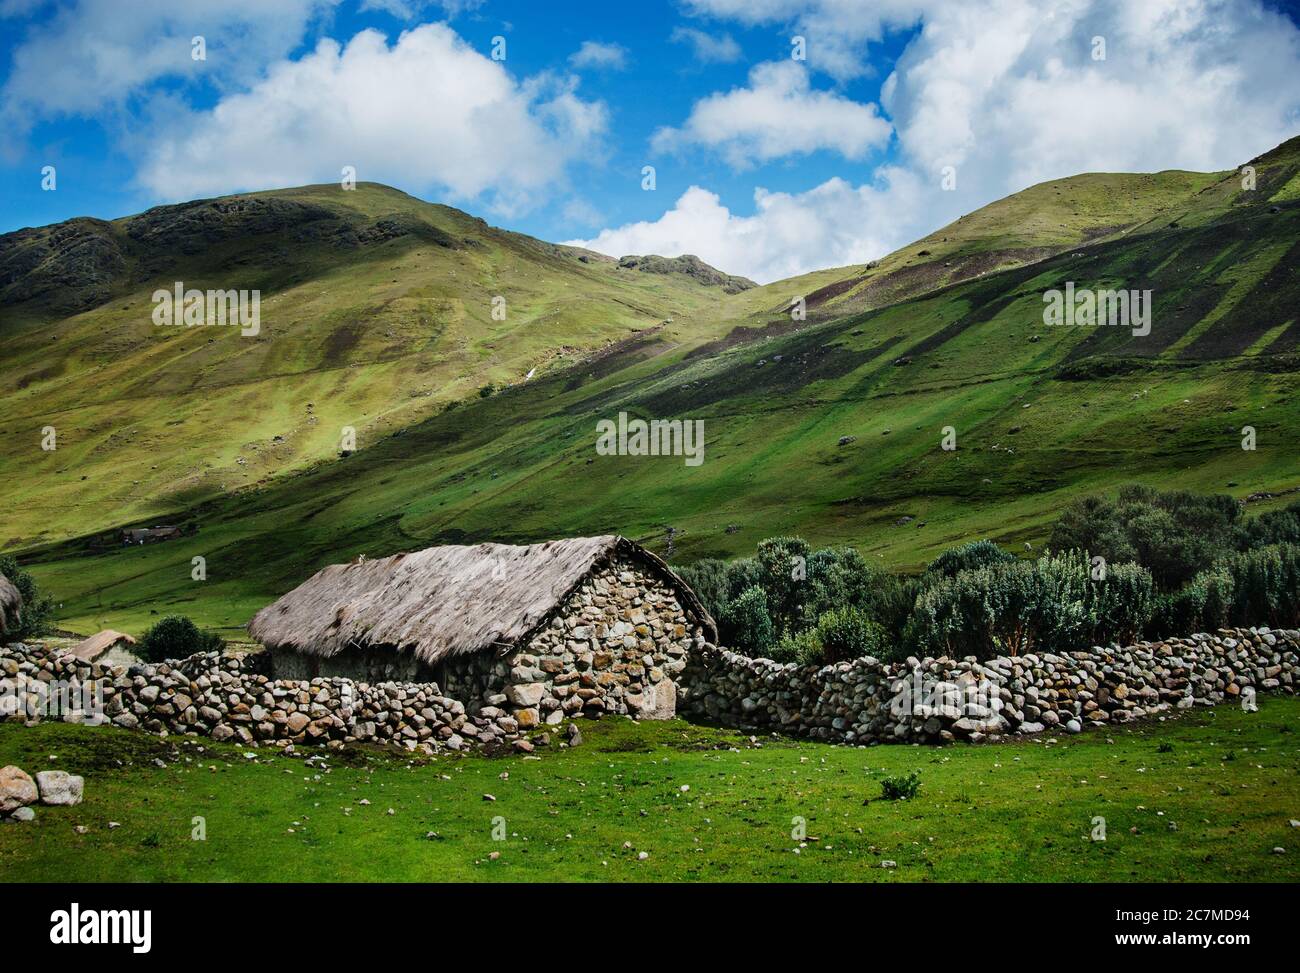 Stone hut in Chaullacocha village, Andes Mountains, Peru, South America Stock Photo